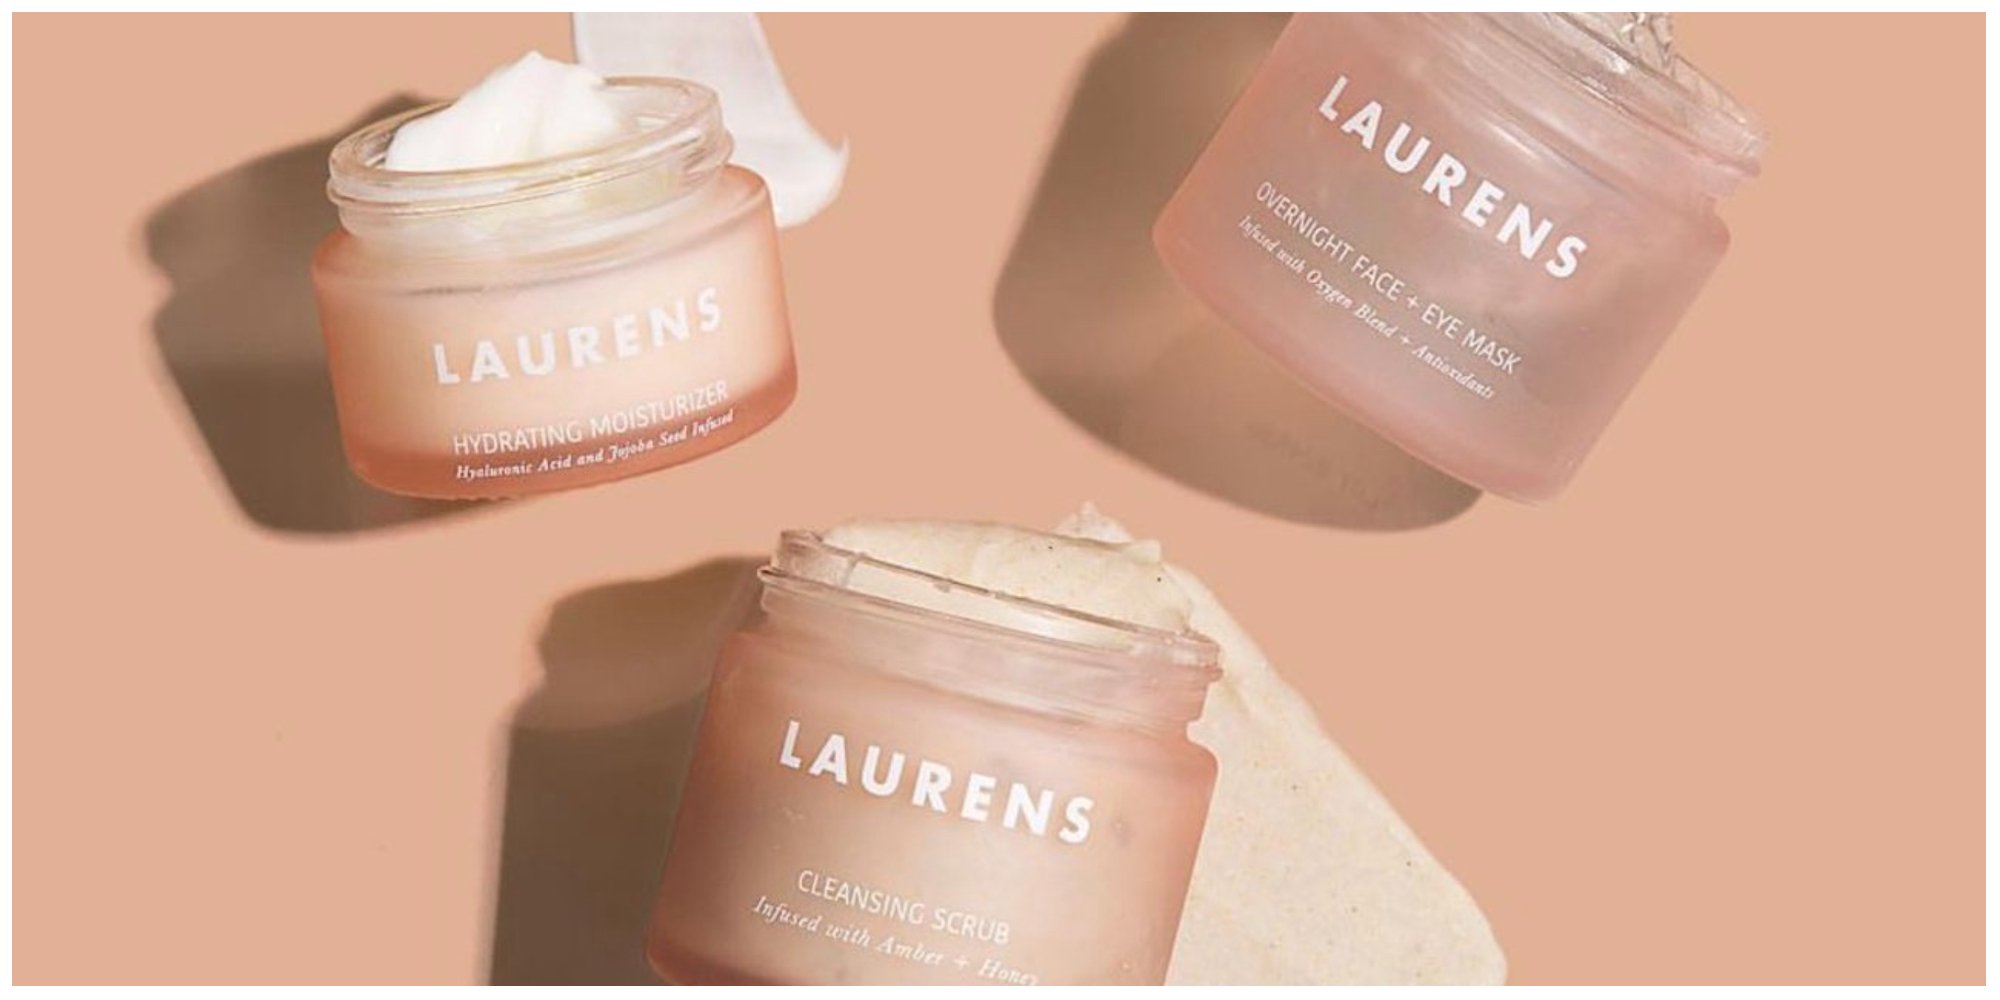 Lauren Sorrentino Introduces Skincare by Laurens in ‘Jersey Shore: Family Vacation’ Season 5 Episode ‘The Meatball Show’